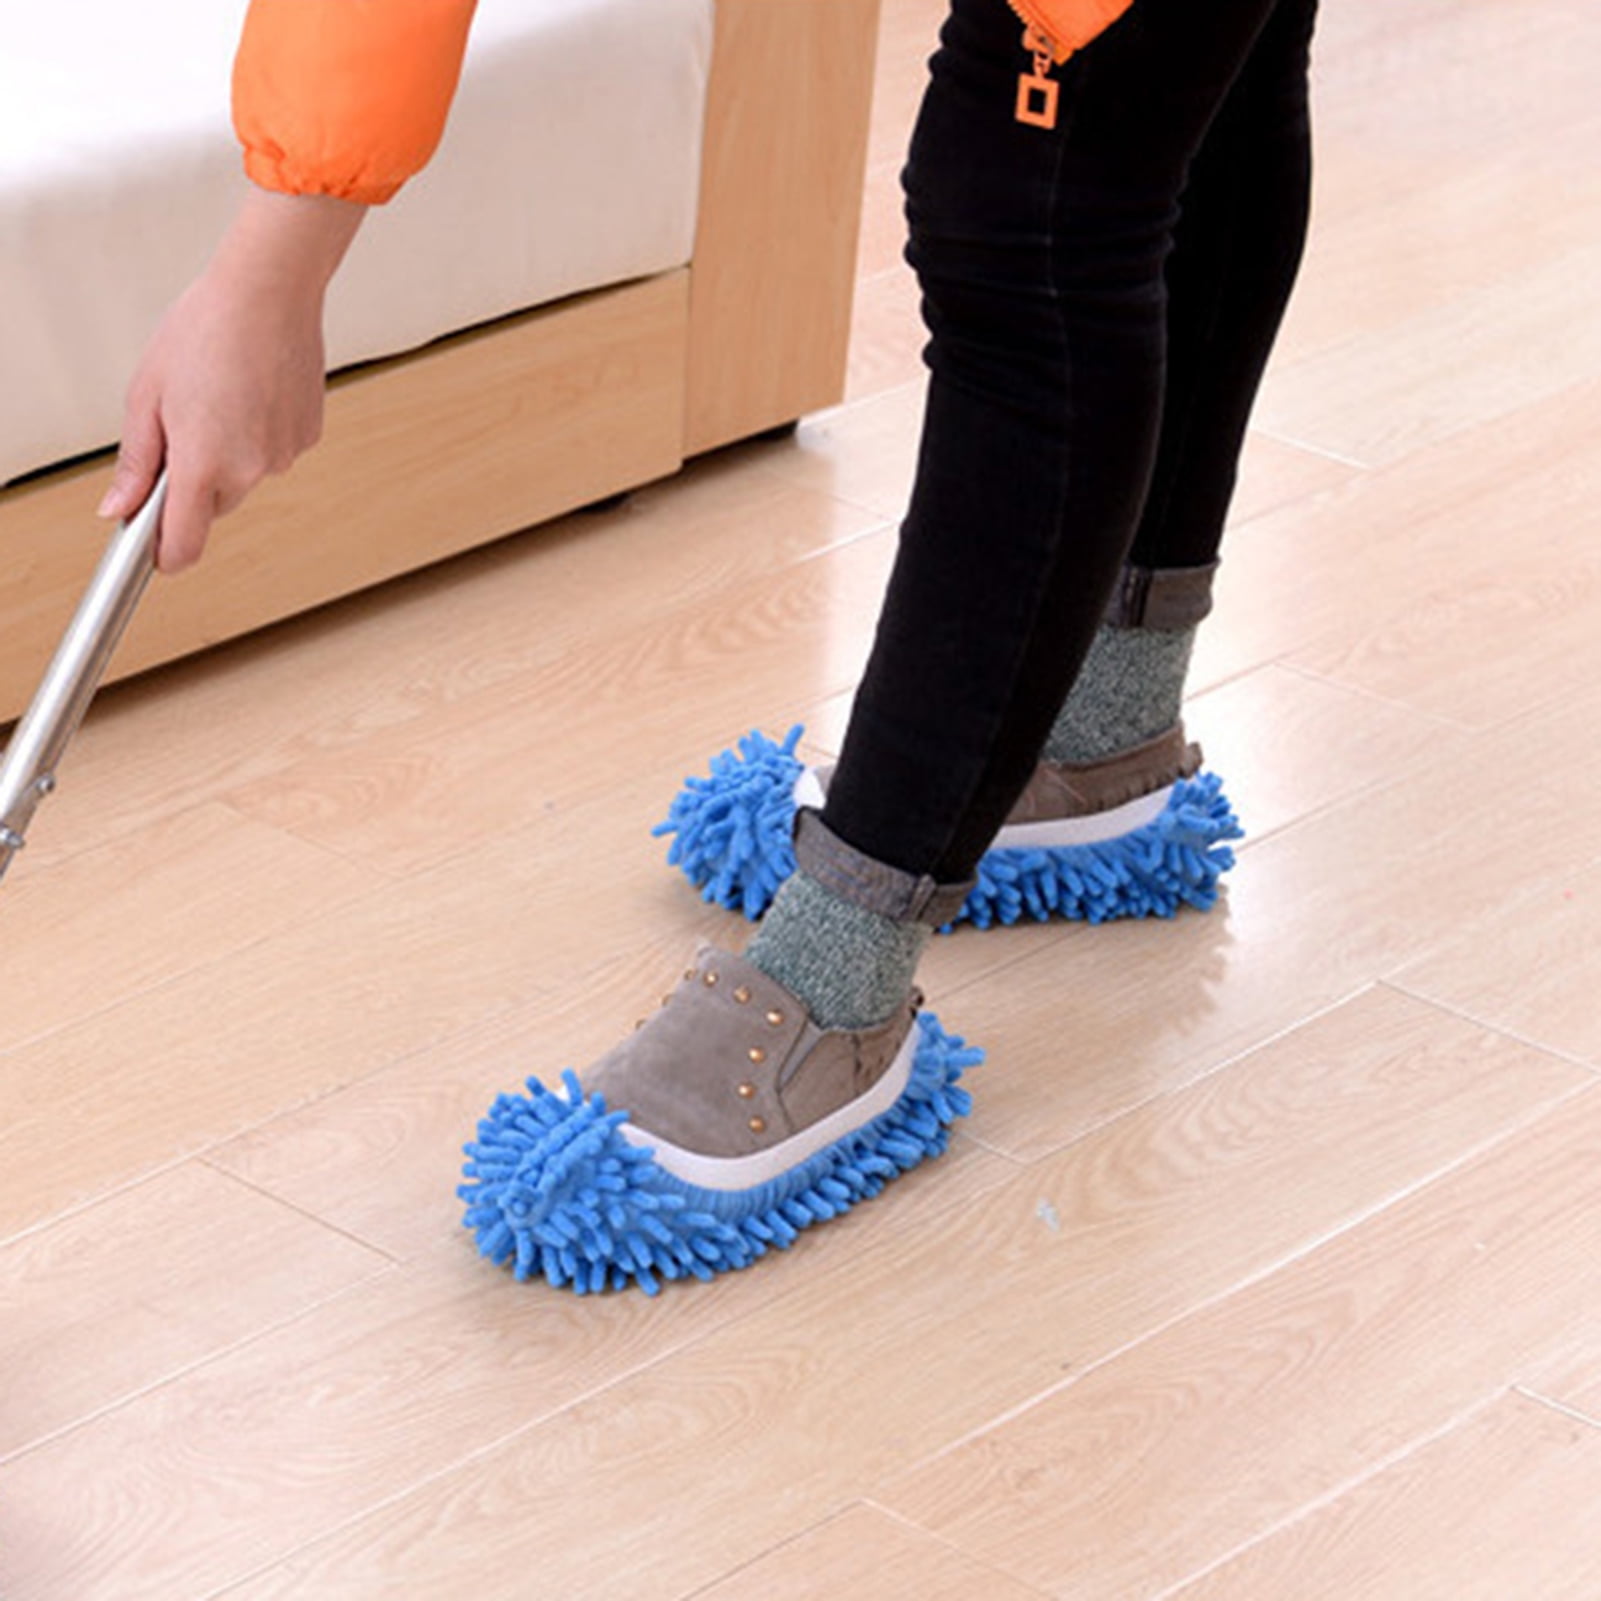 Shoe Mop Cleaner Dust Cleaner Clean Shoe Covers Floor Cleaning Slippers Shoes 